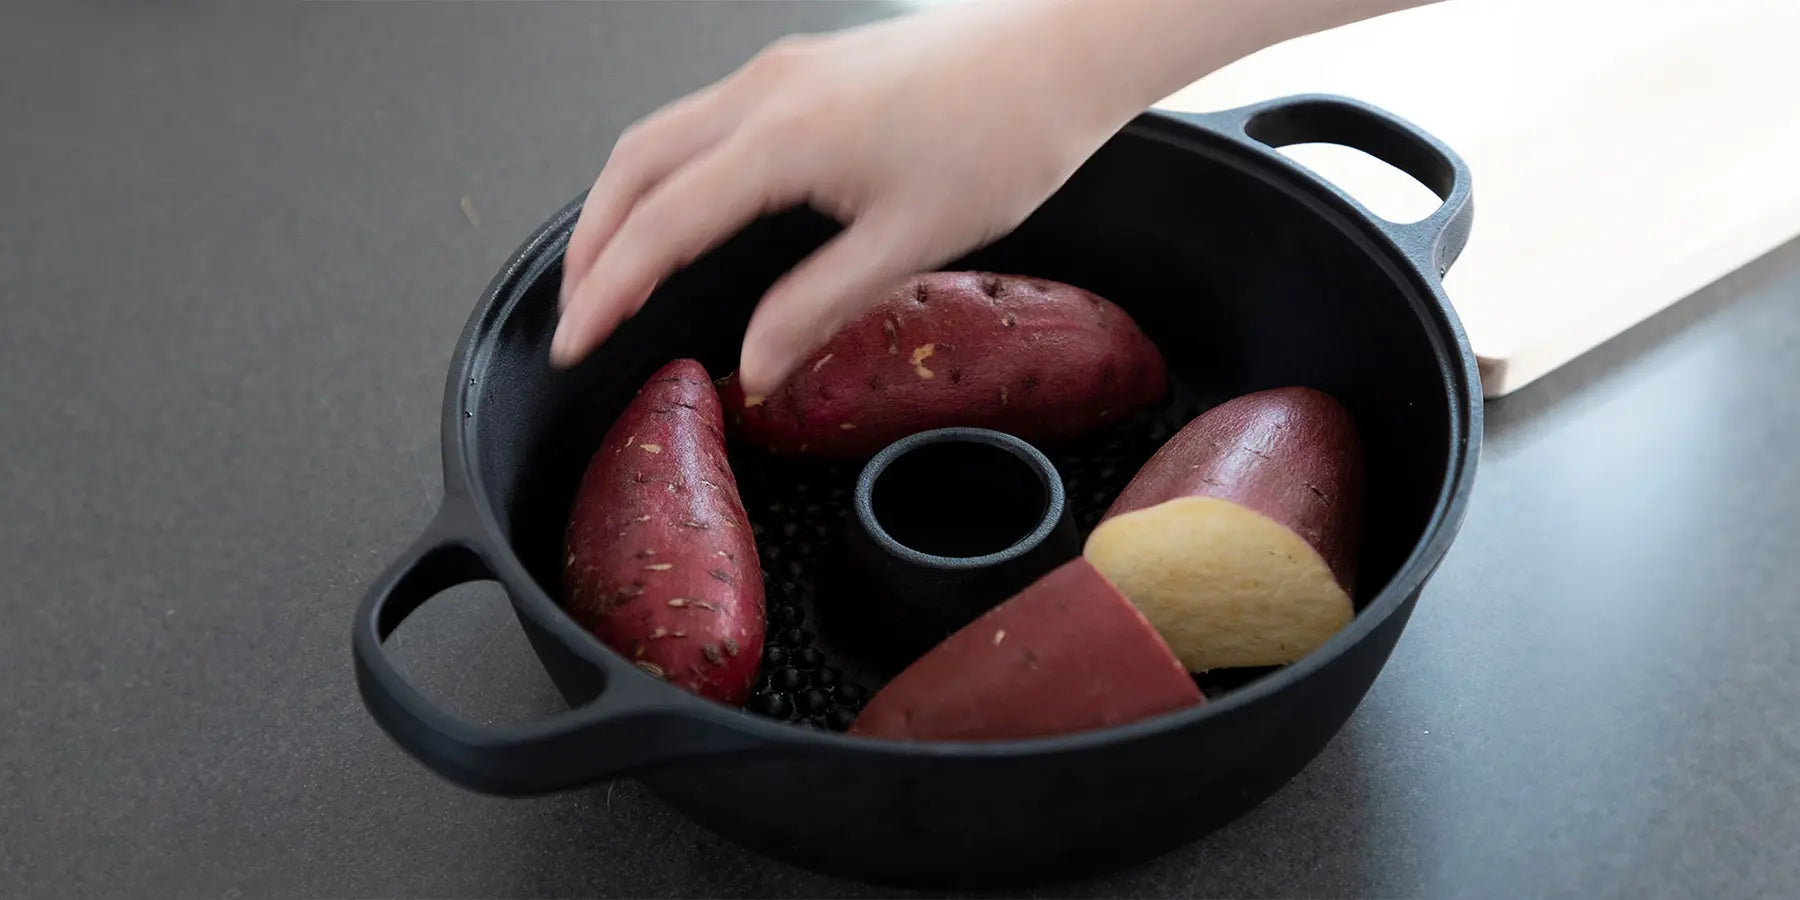 Discover our great selection of Sweet Potato Pots at Globalkitchen Japan.